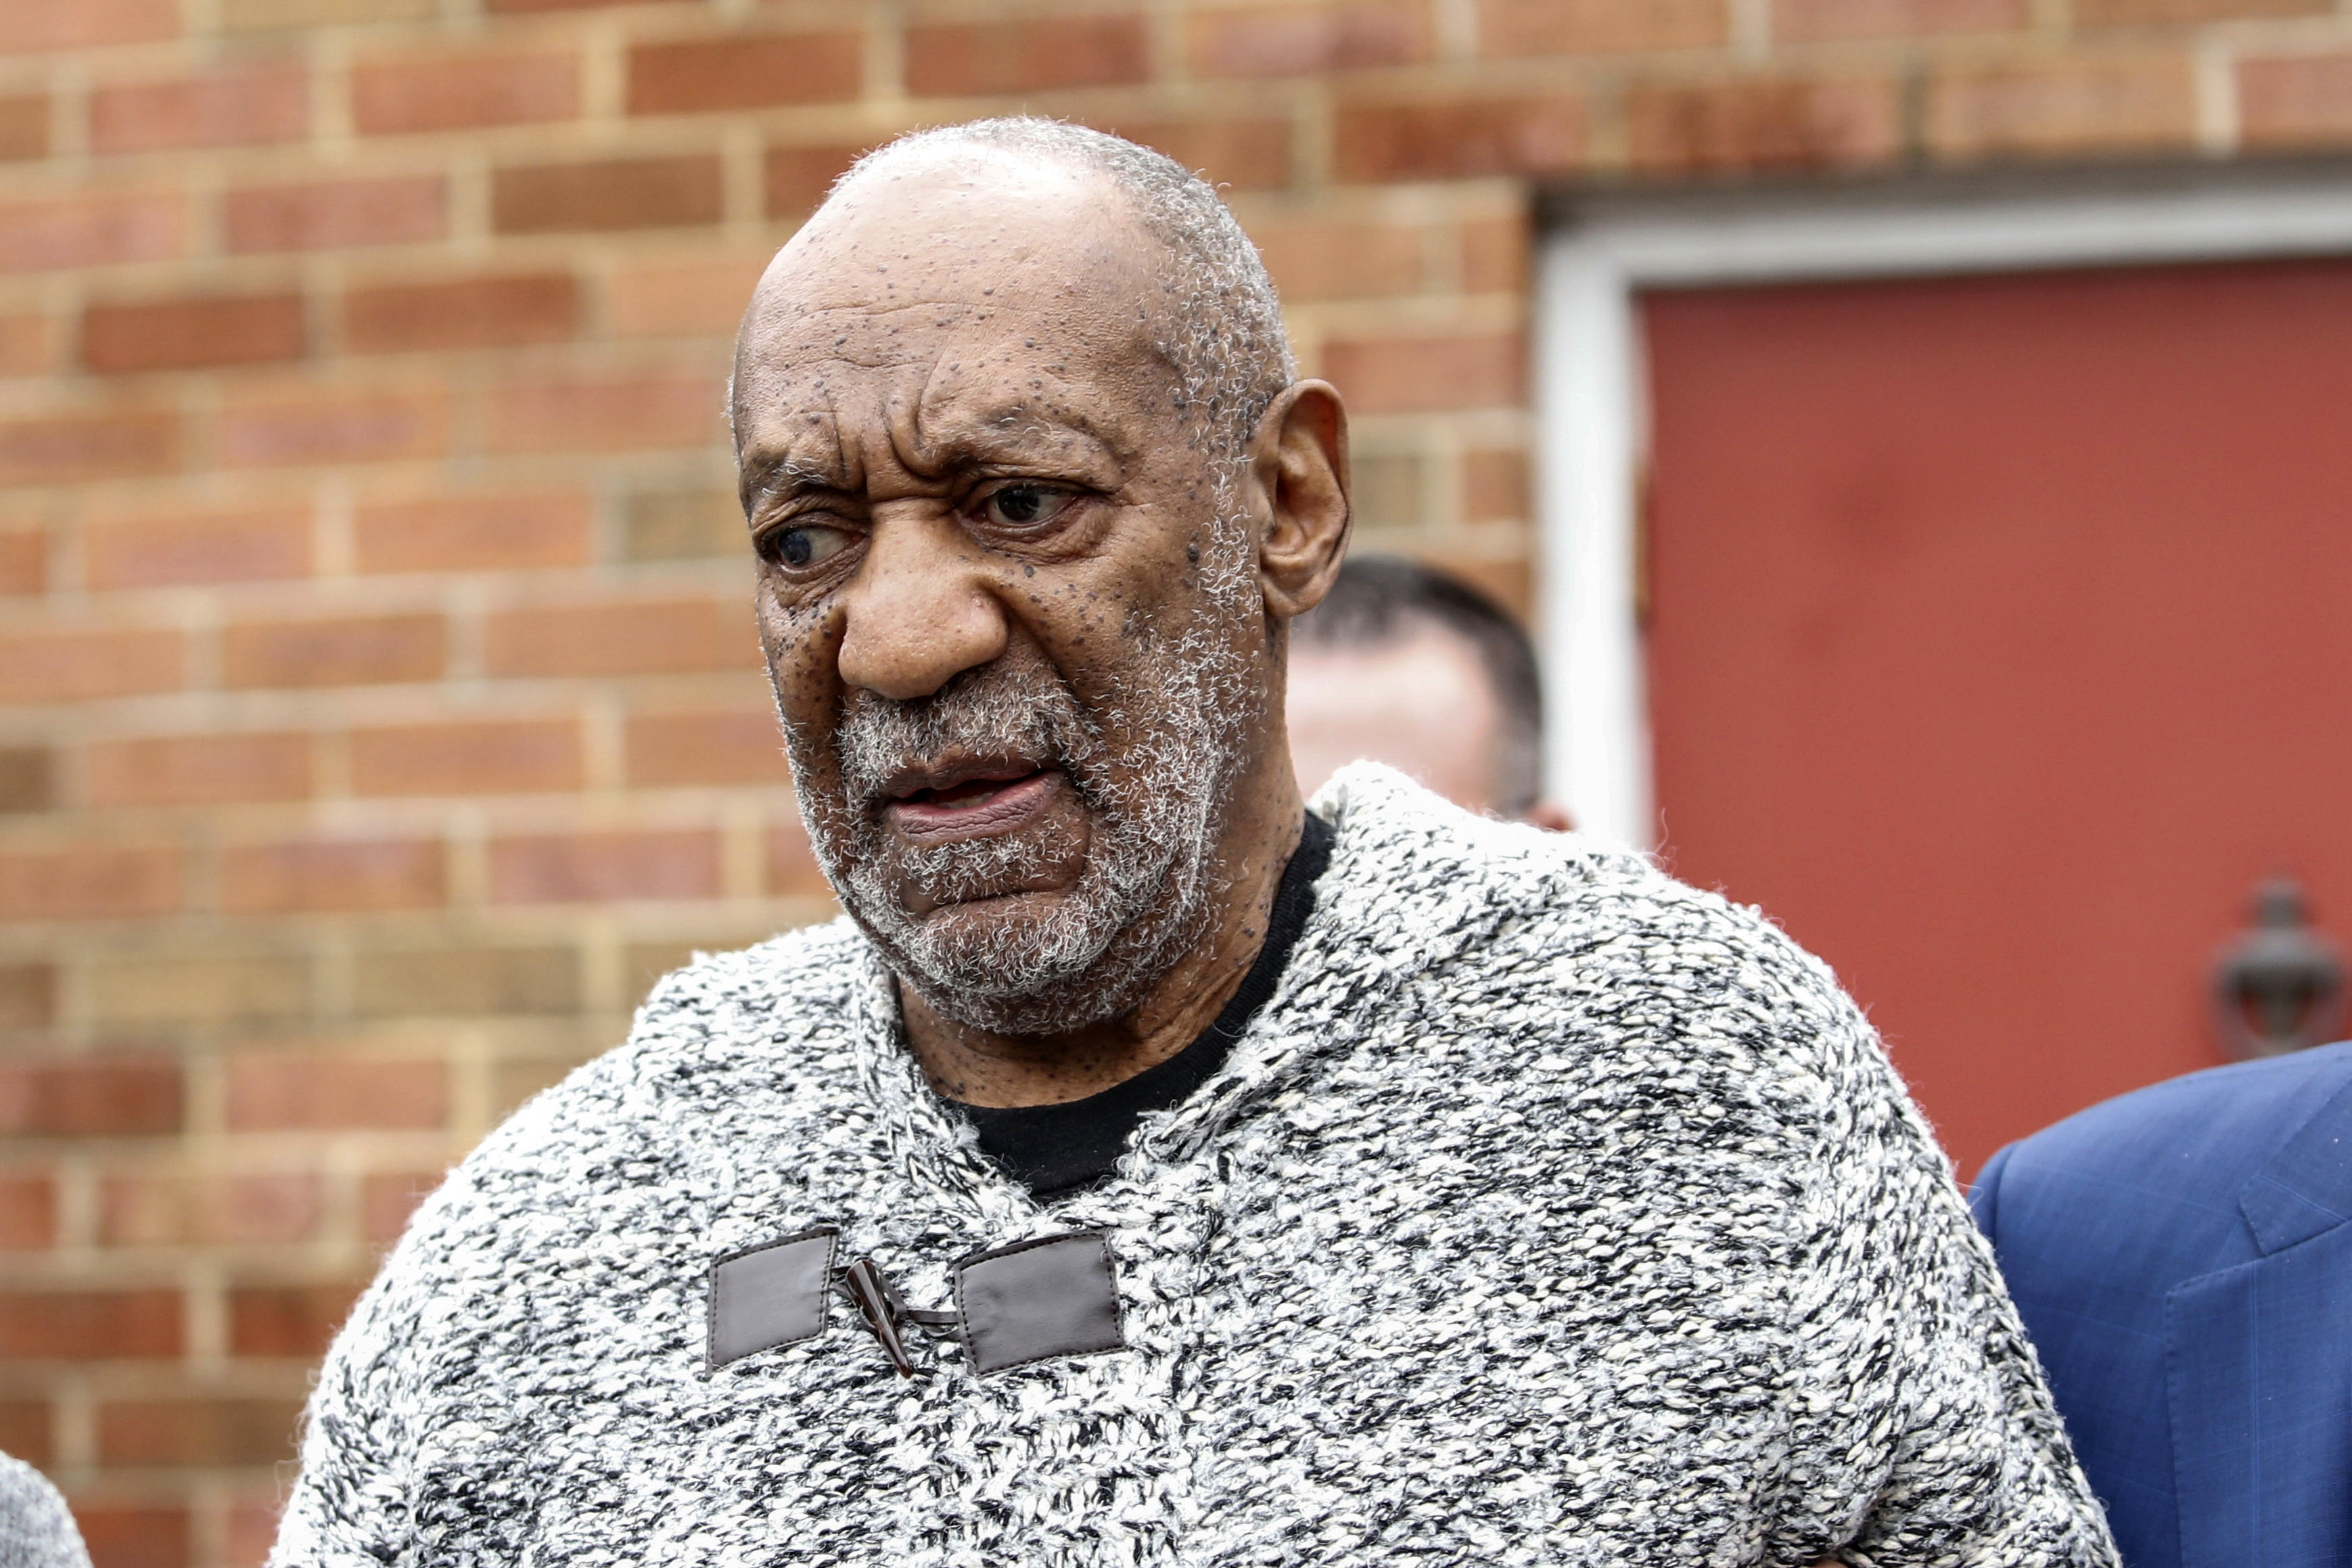 Comedian Bill Cosby leaves Dec. 30, 2015 the Court House in Elkins Park, Pennsylvania after arraignment on charges of aggravated indecent assault. (Kena Betancur—AFP/Getty Images)